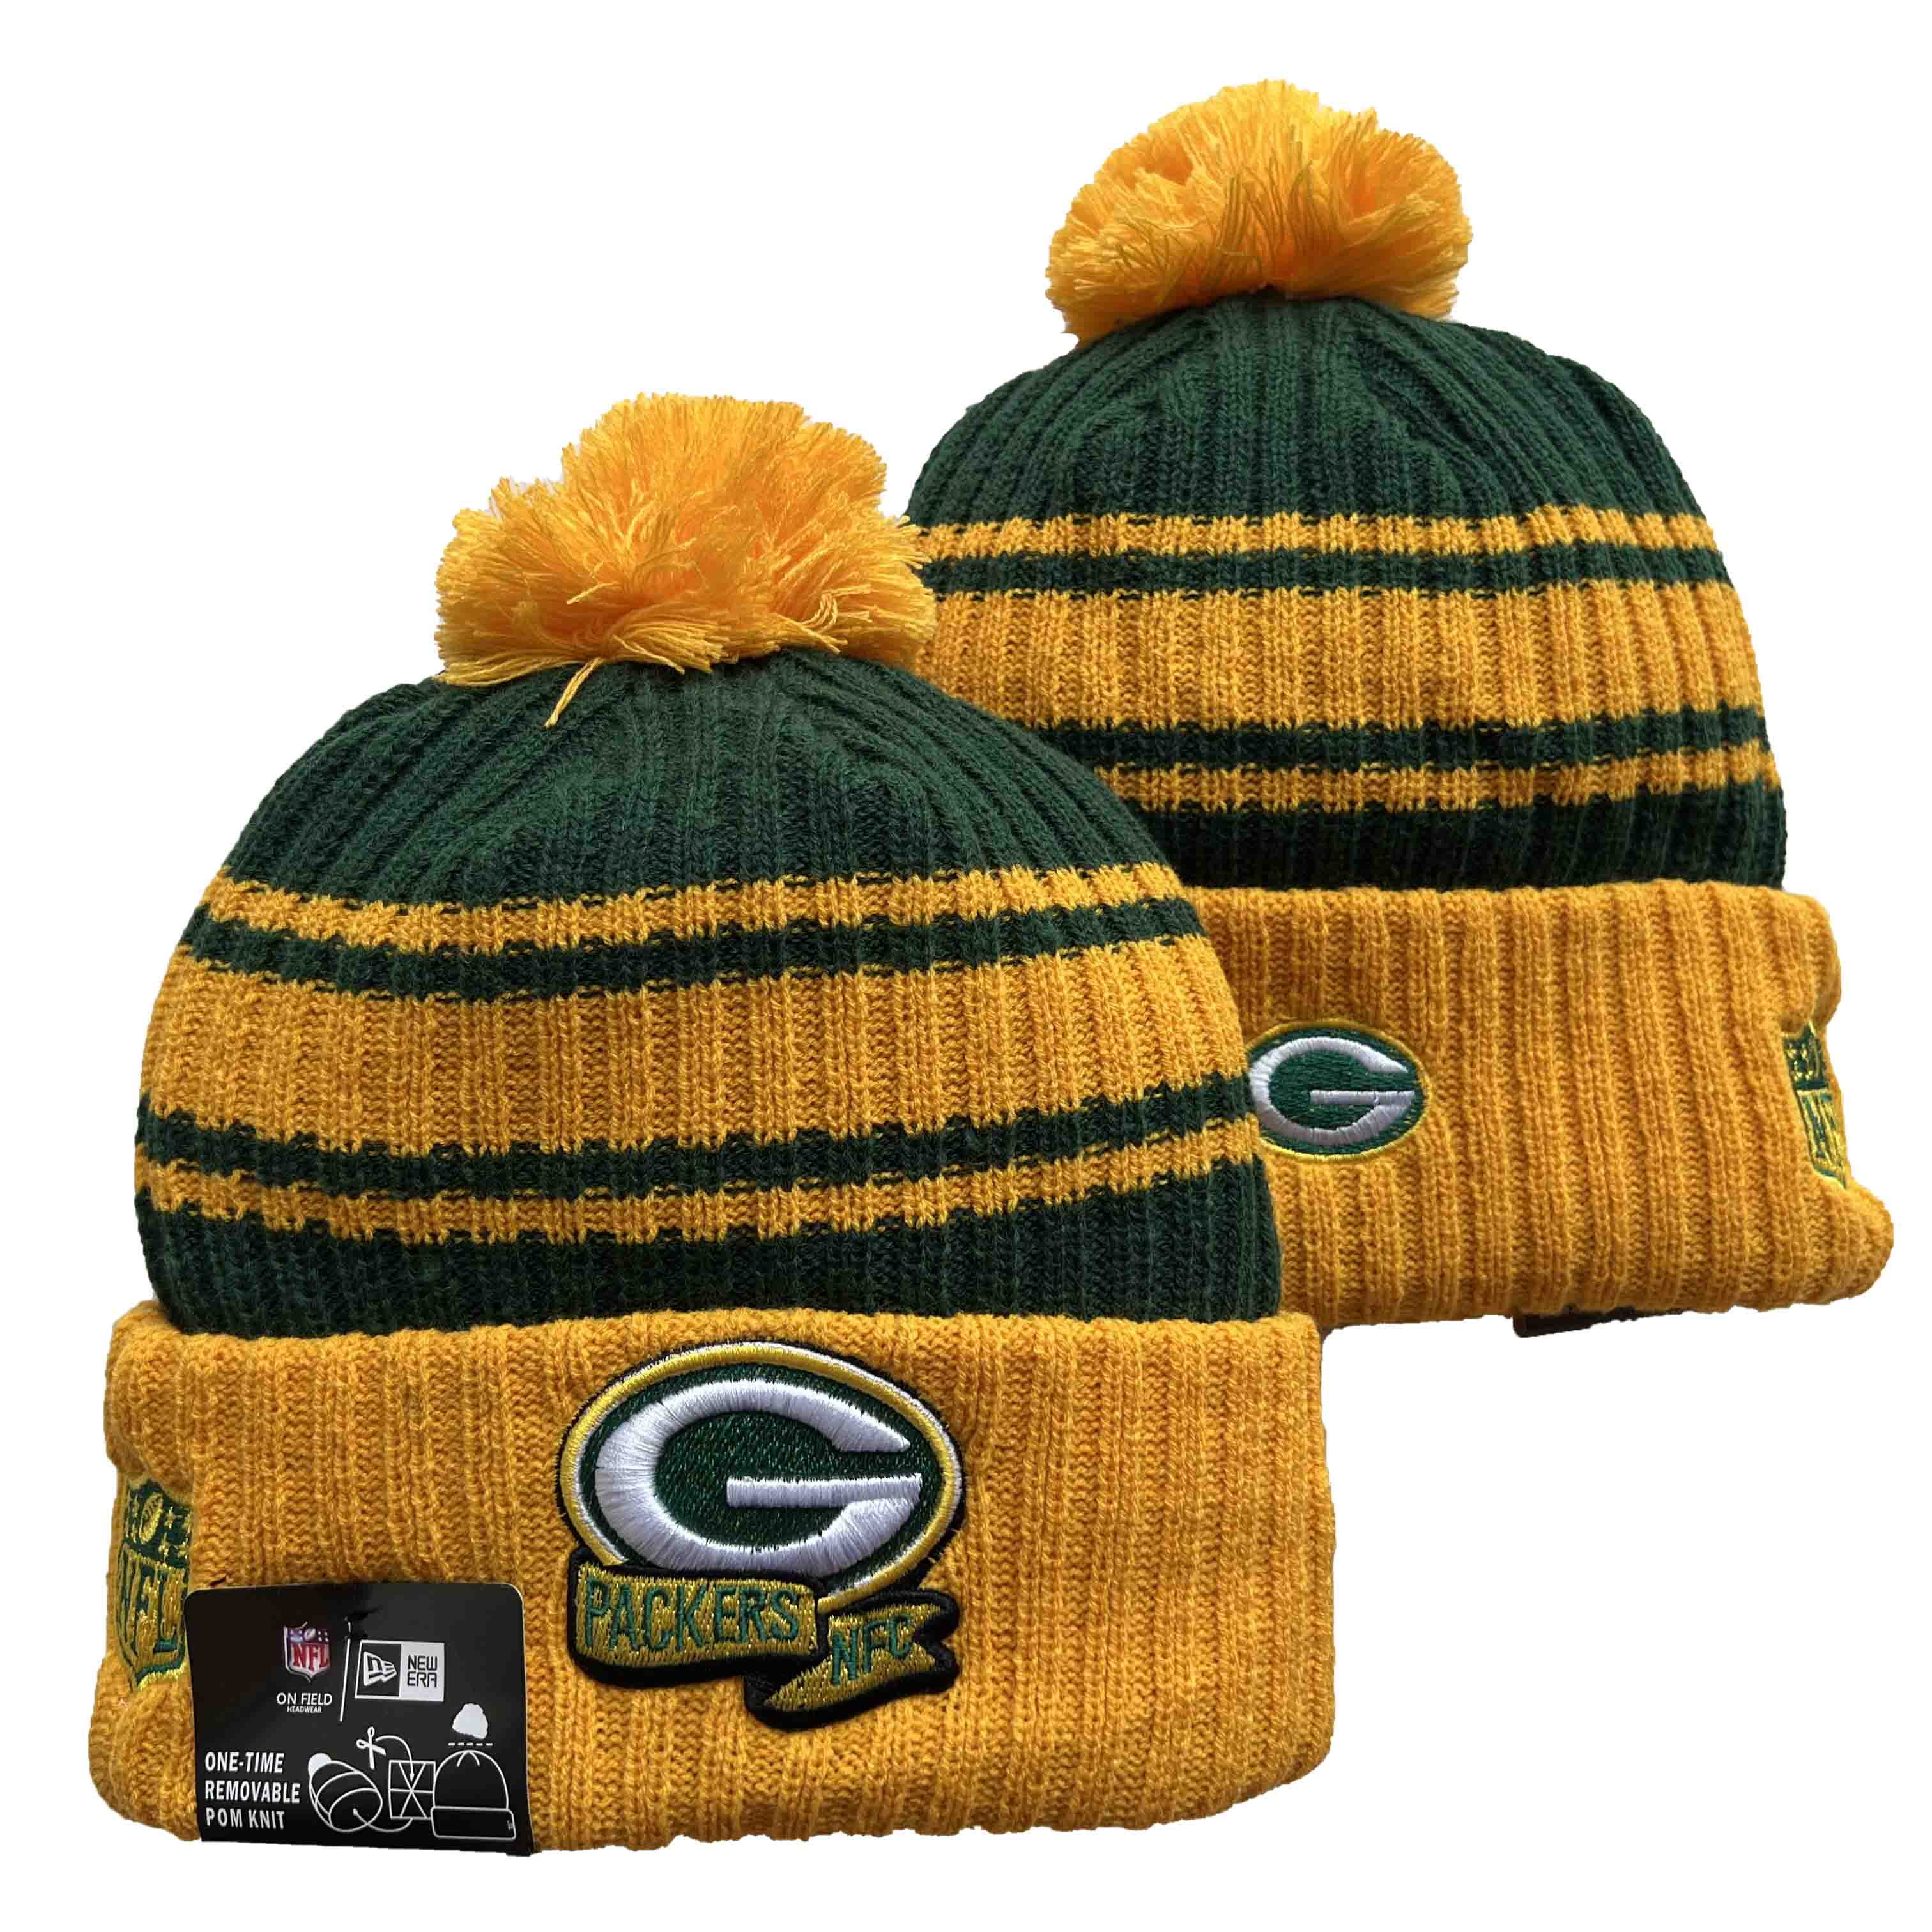 NFL Green Bay Packers Beanies Knit Hats-YD1180